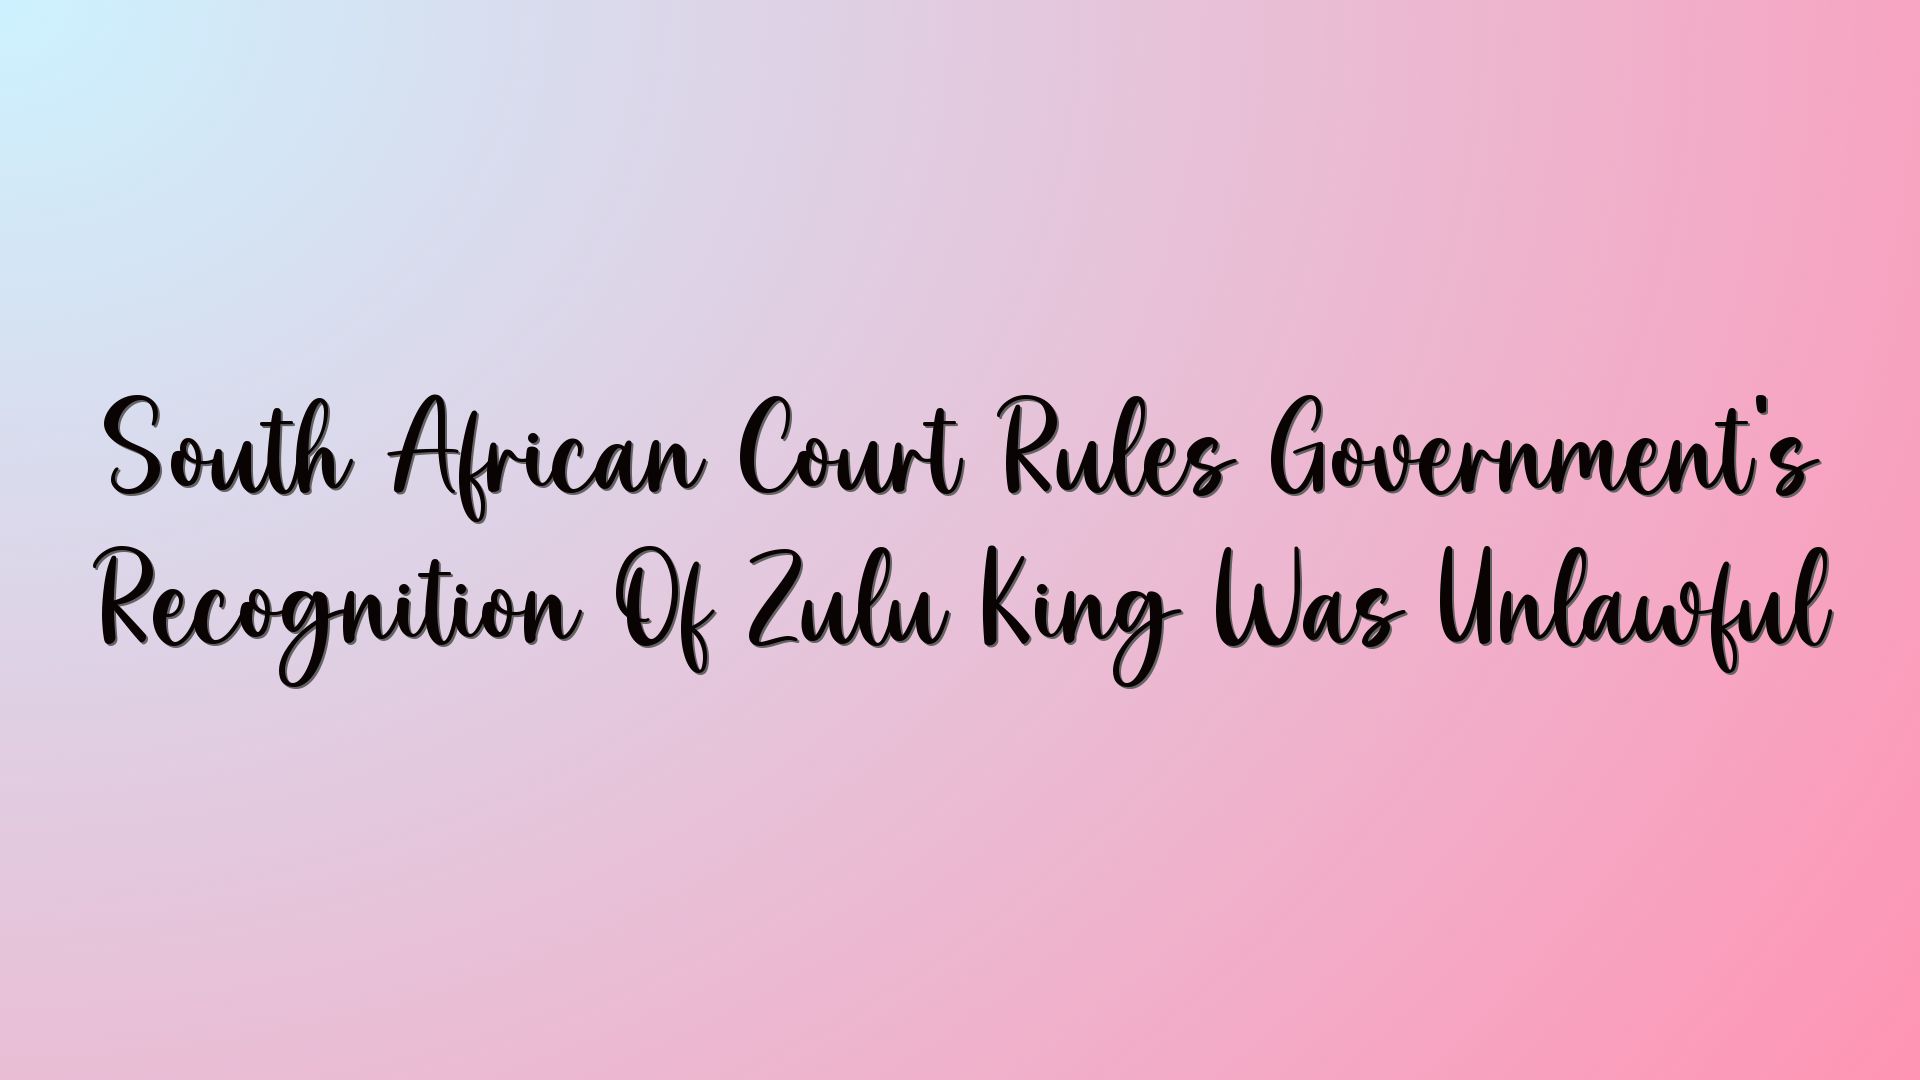 South African Court Rules Government’s Recognition Of Zulu King Was Unlawful